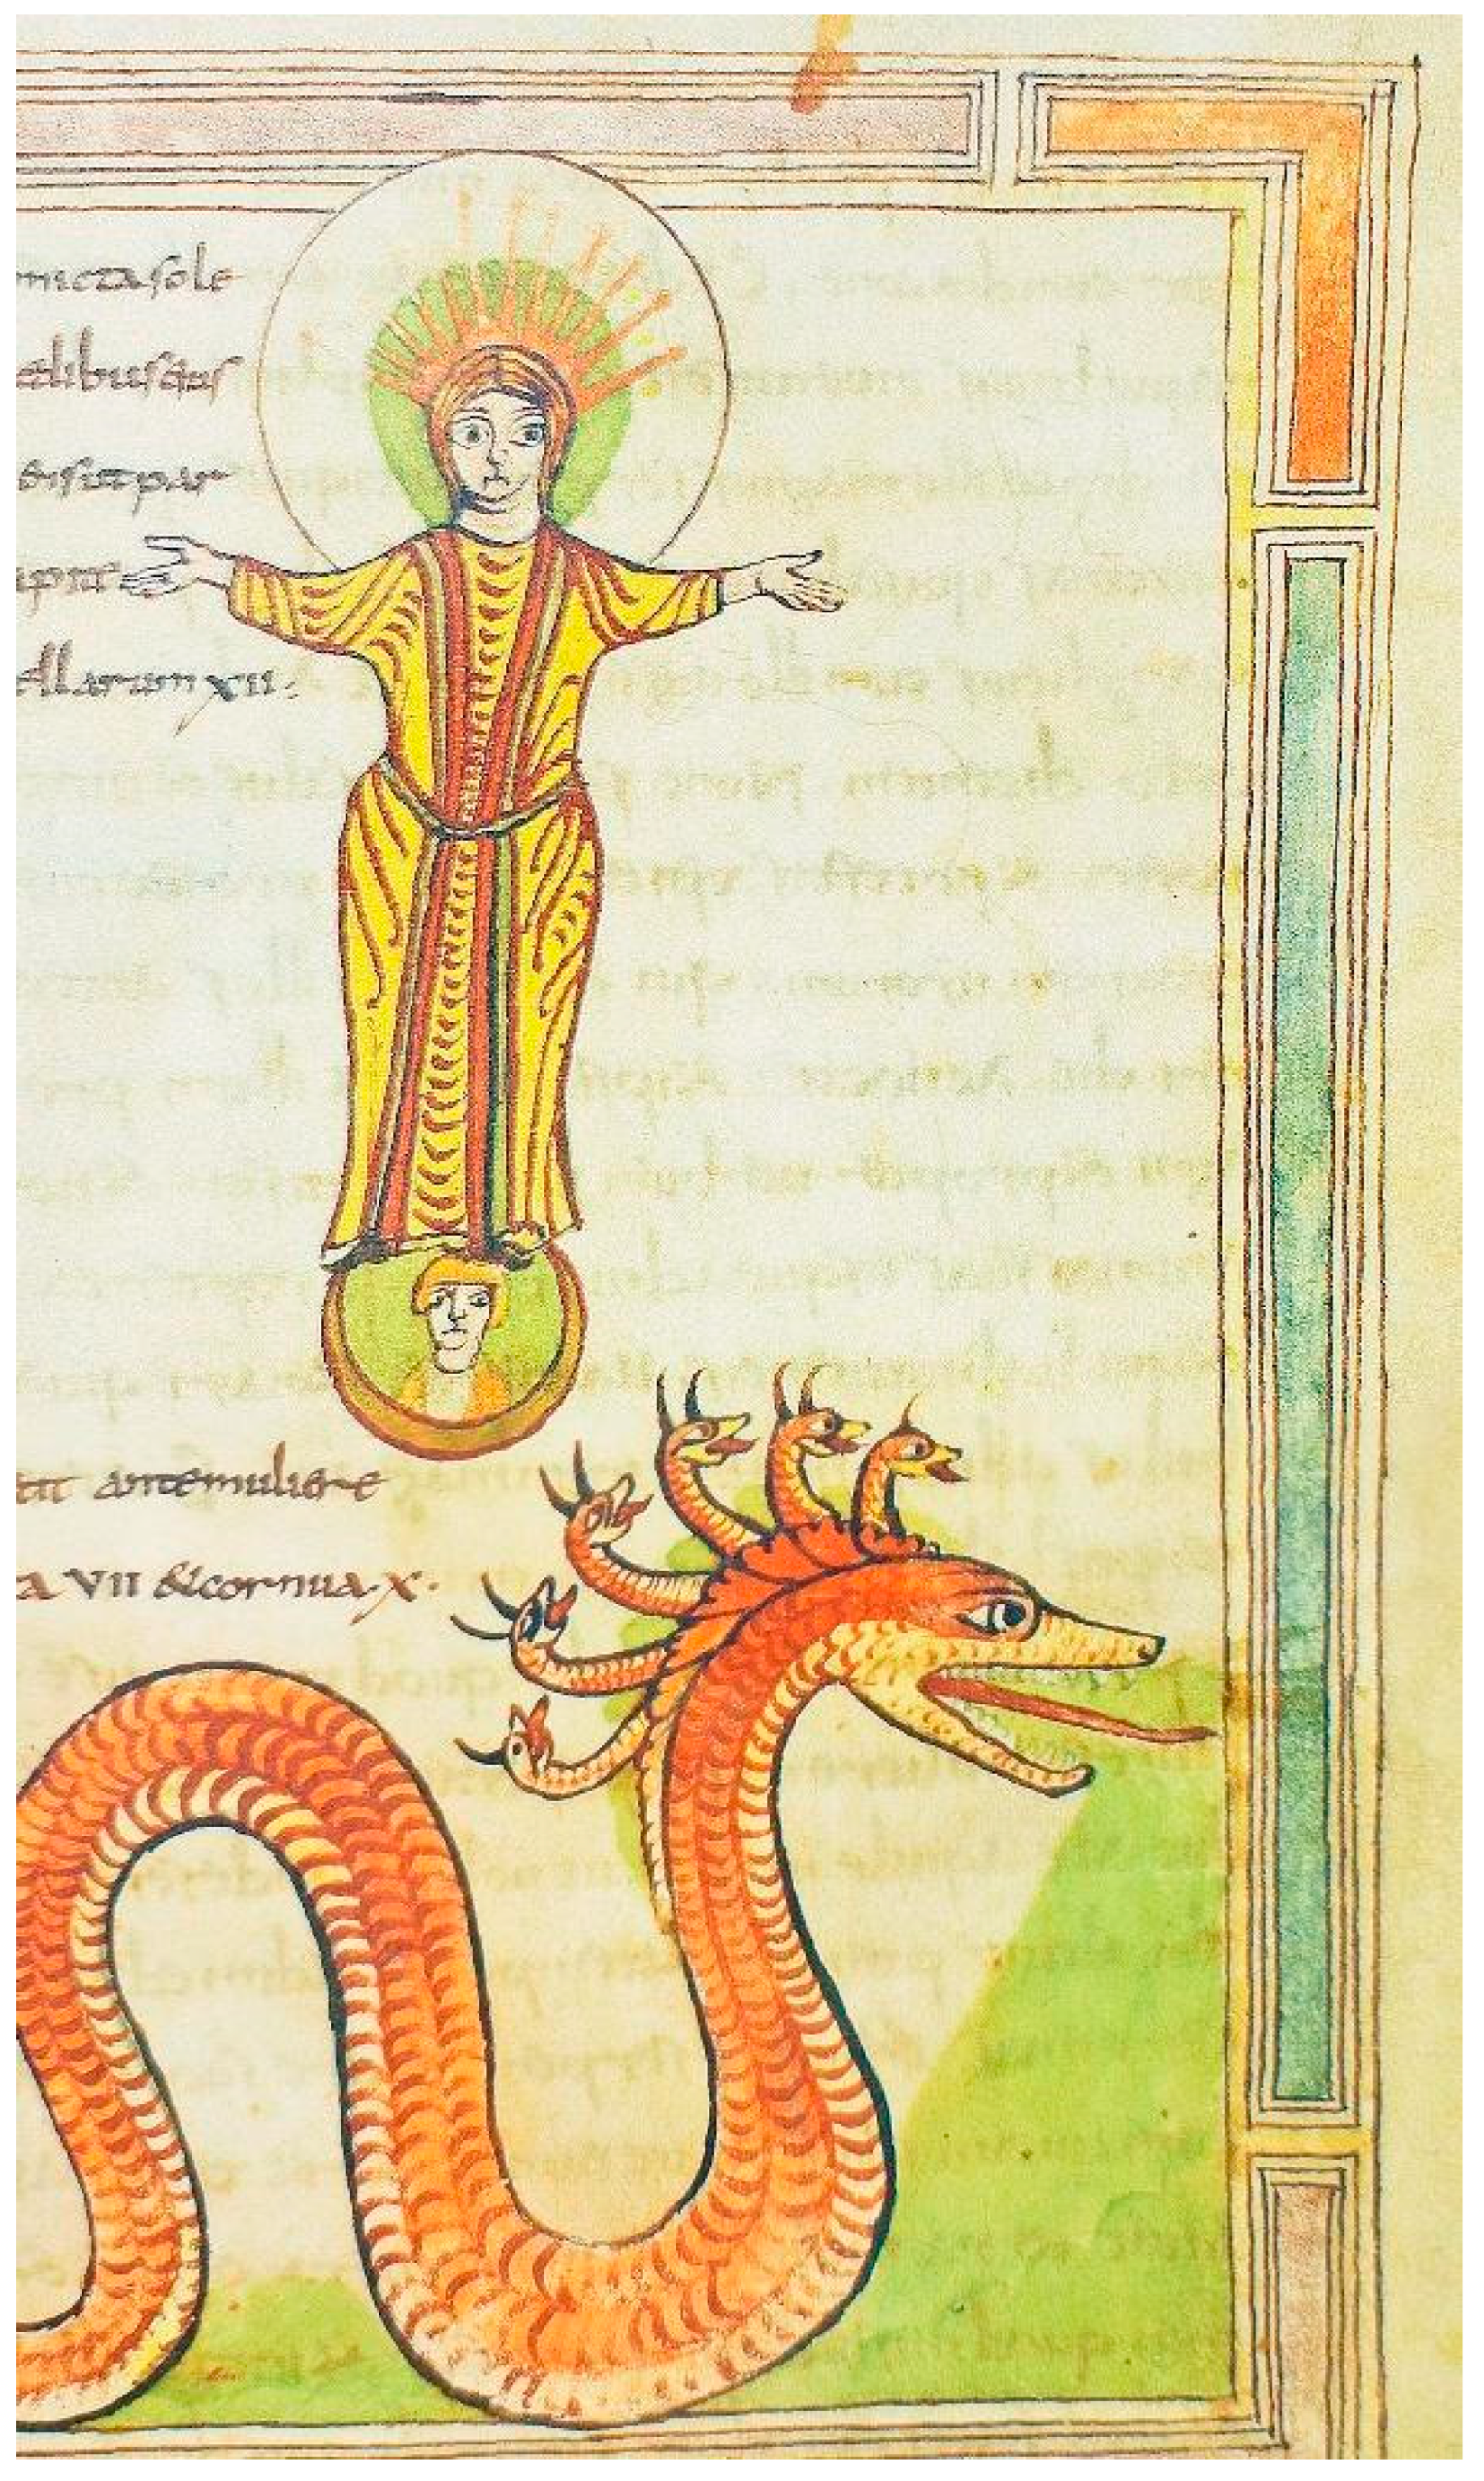 Dragons in the Middle Ages: Myth, Symbolism, and Influence in